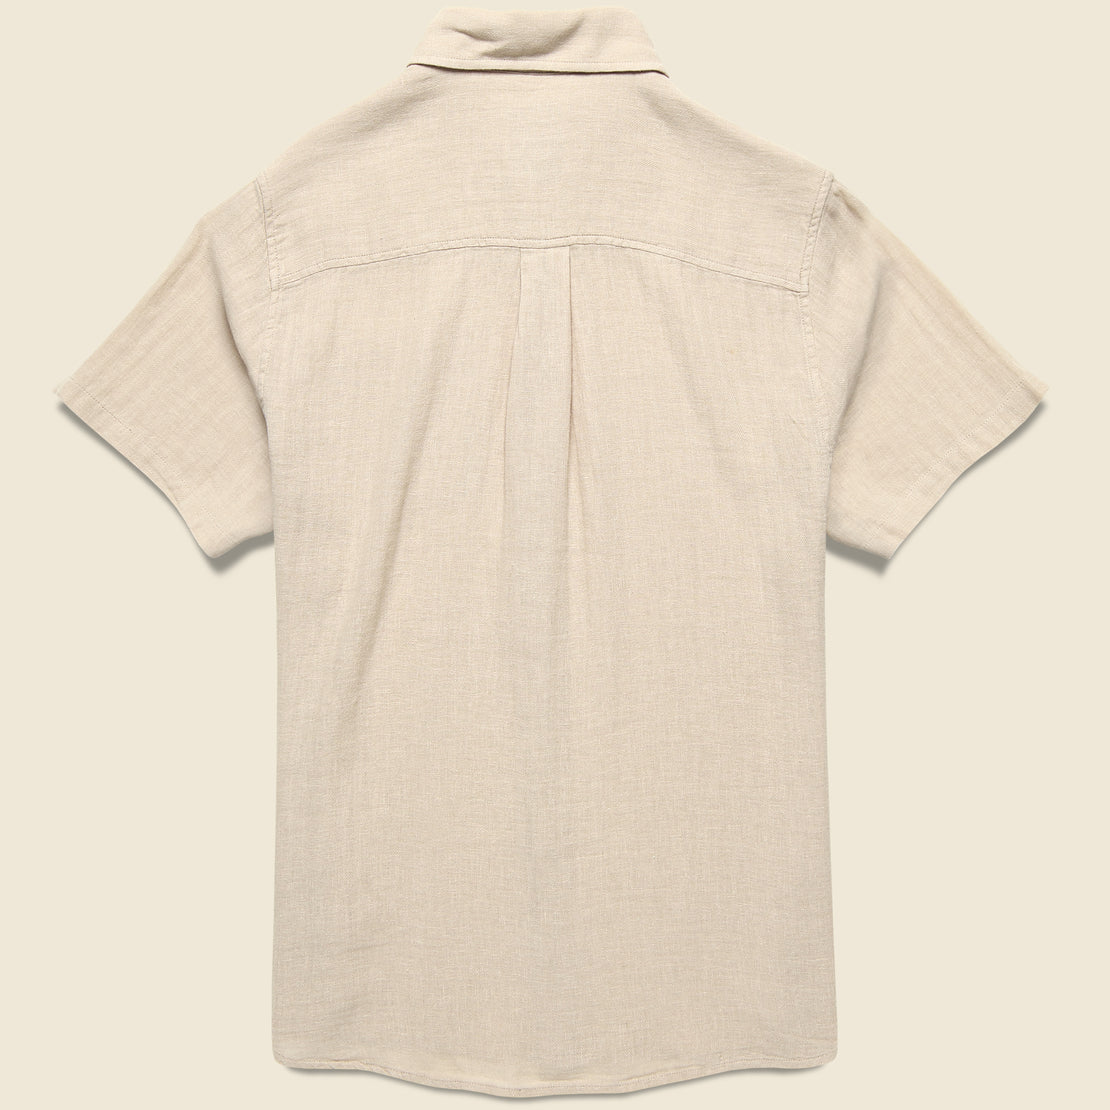 Alan Solid Shirt - Light Gray - Katin - STAG Provisions - Tops - S/S Woven - Solid